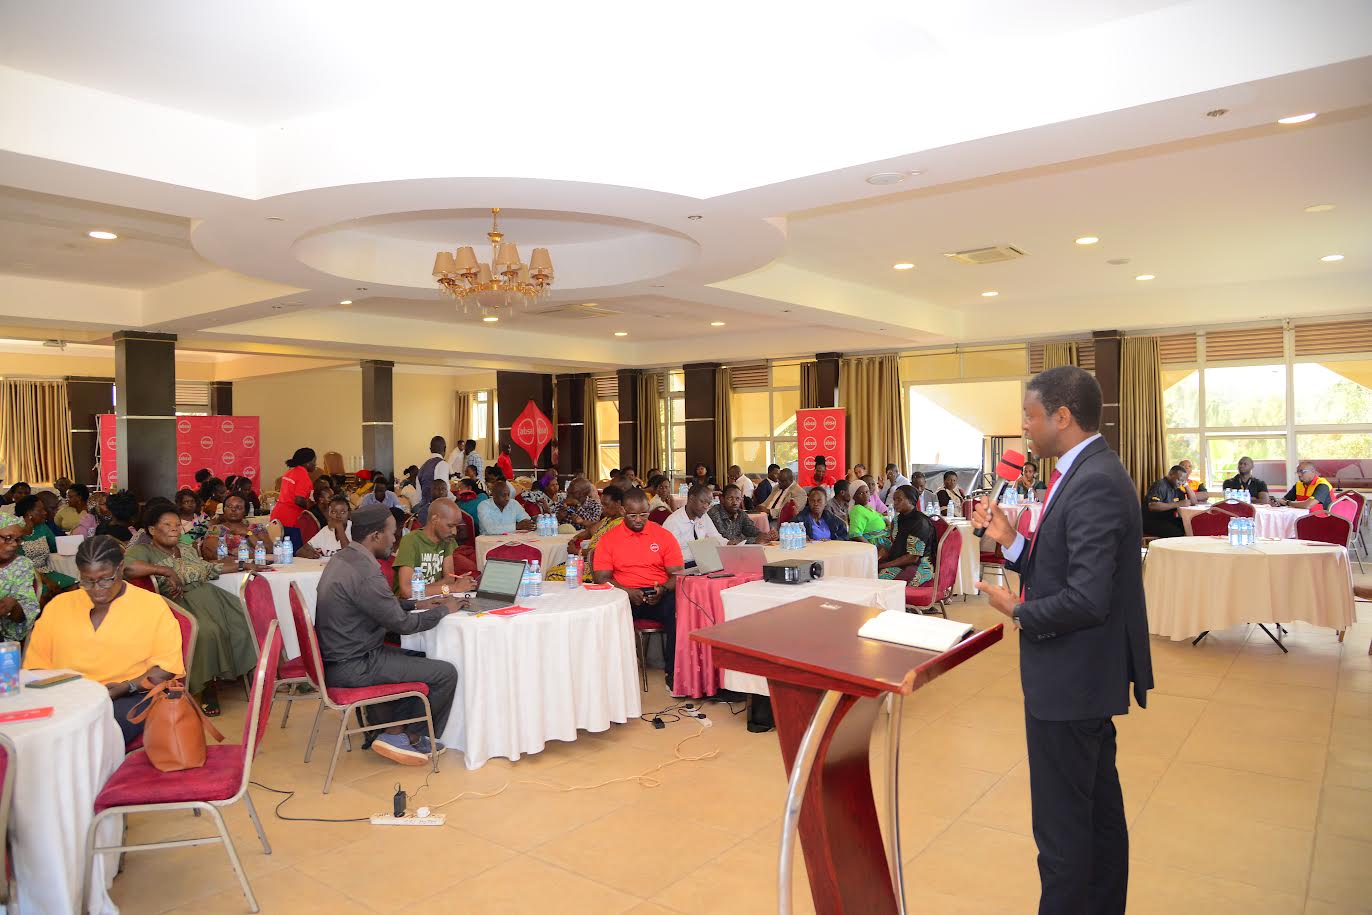 Absa, DHL build capacity of over 200 SMEs in Jinja